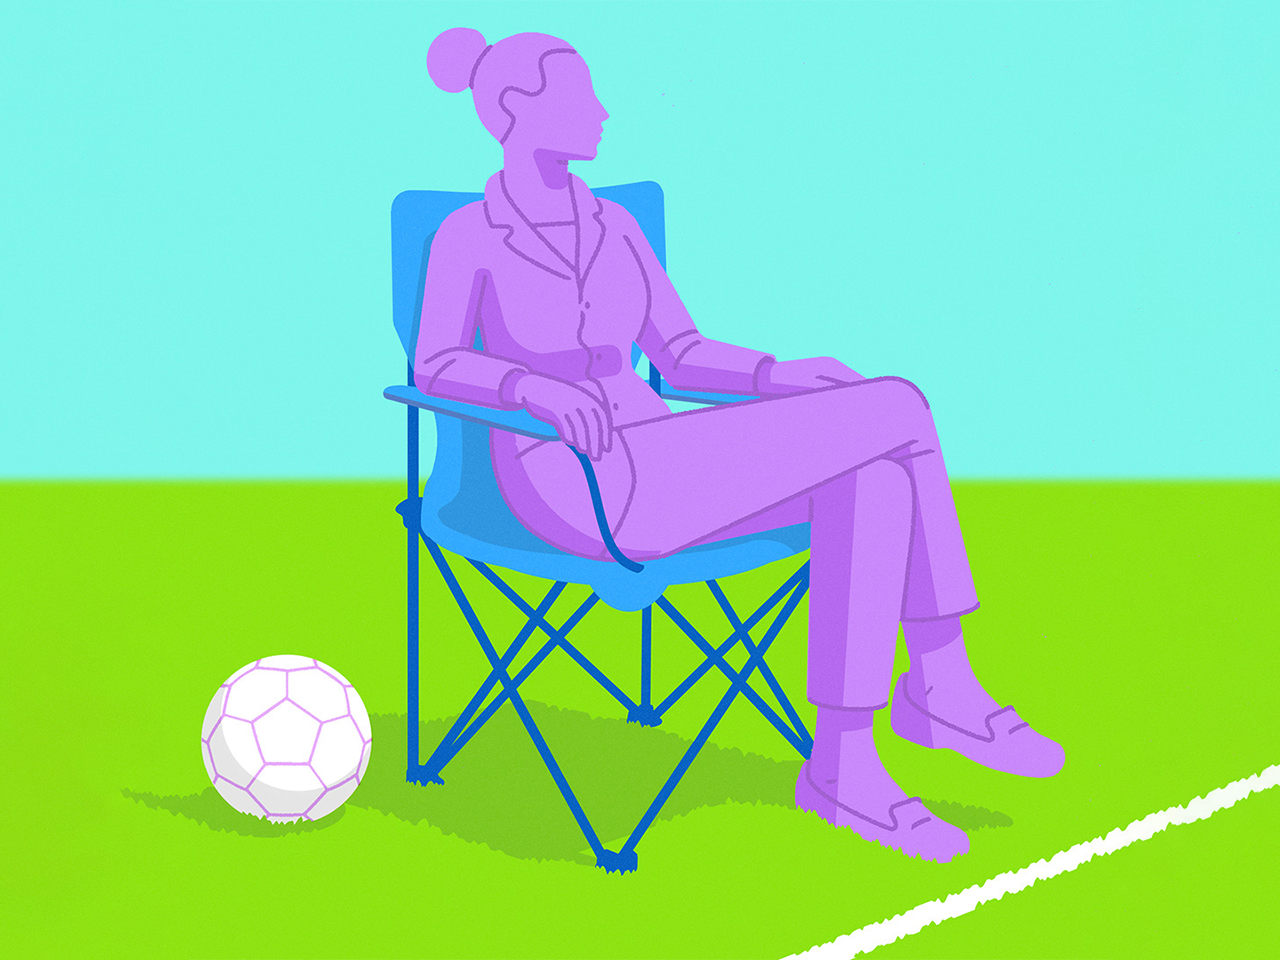 A woman in work clothes sitting on the sidelines, next to a soccer ball.